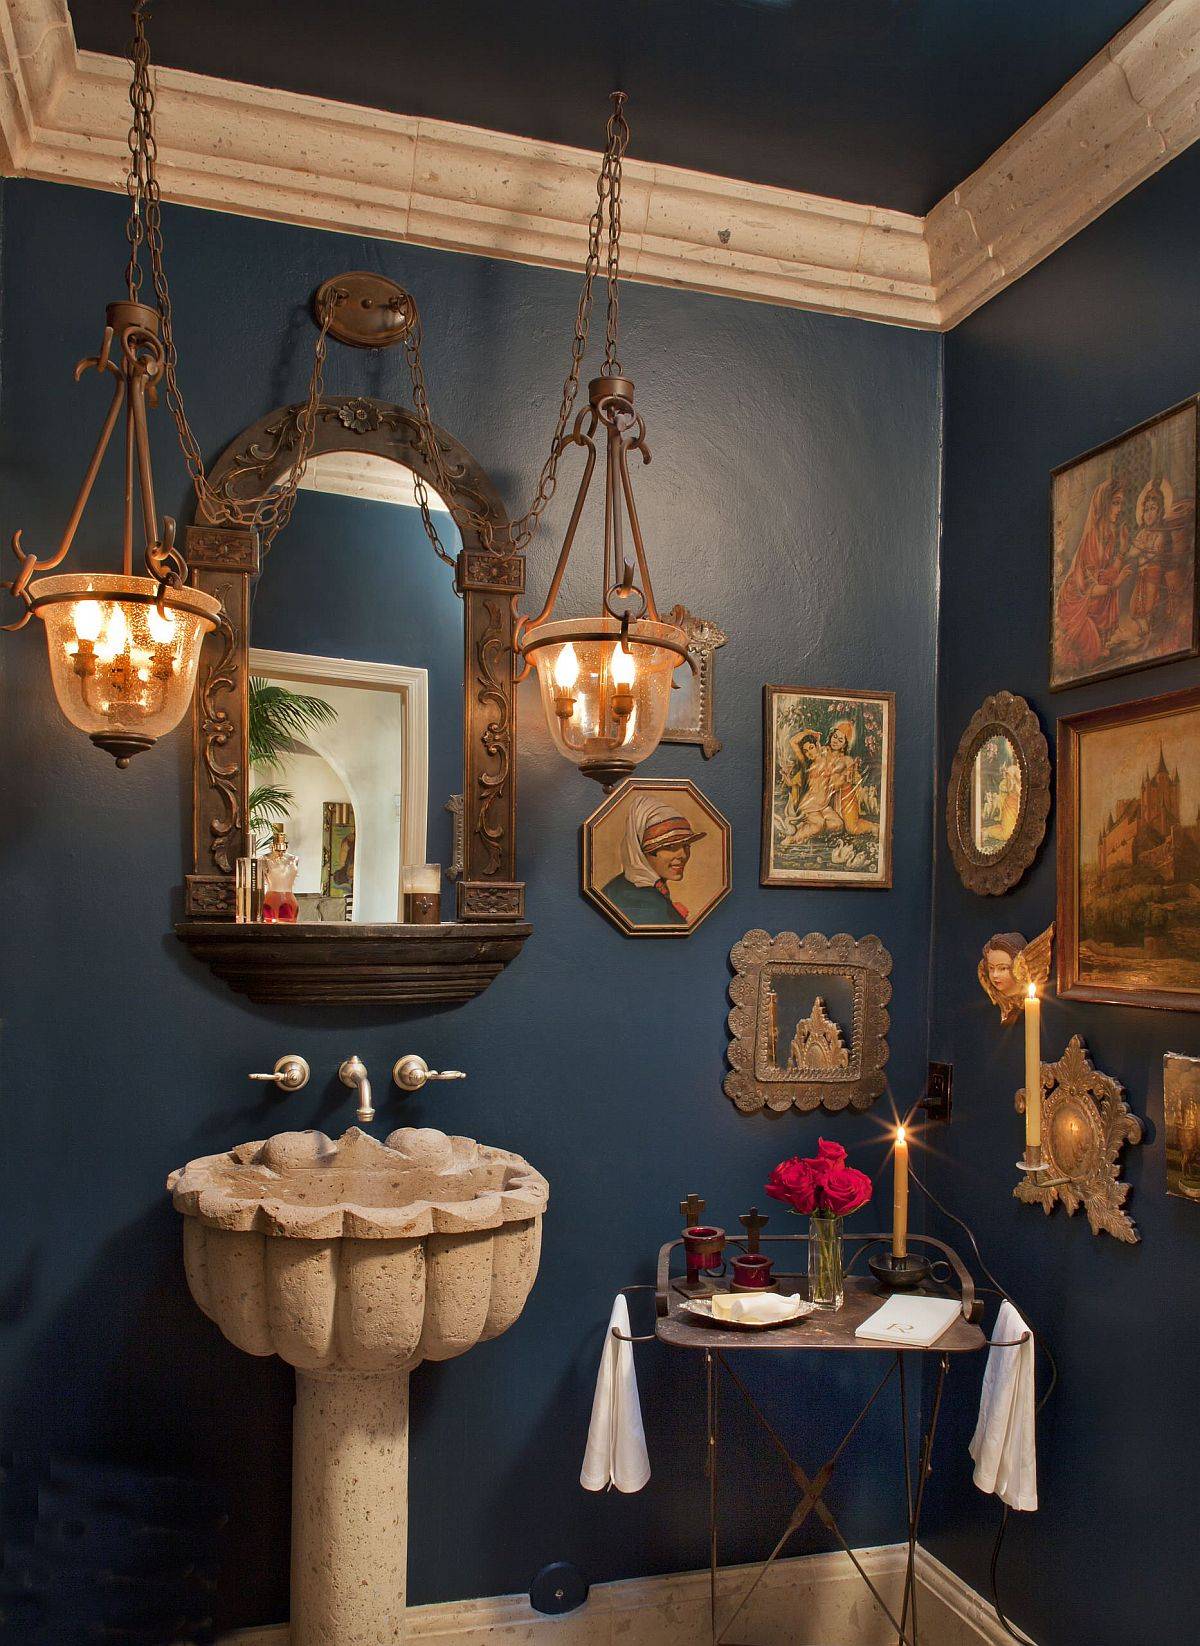 Eclectic-charm-coupled-with-Spanish-Colonial-overtones-in-the-colorful-powder-room-67749